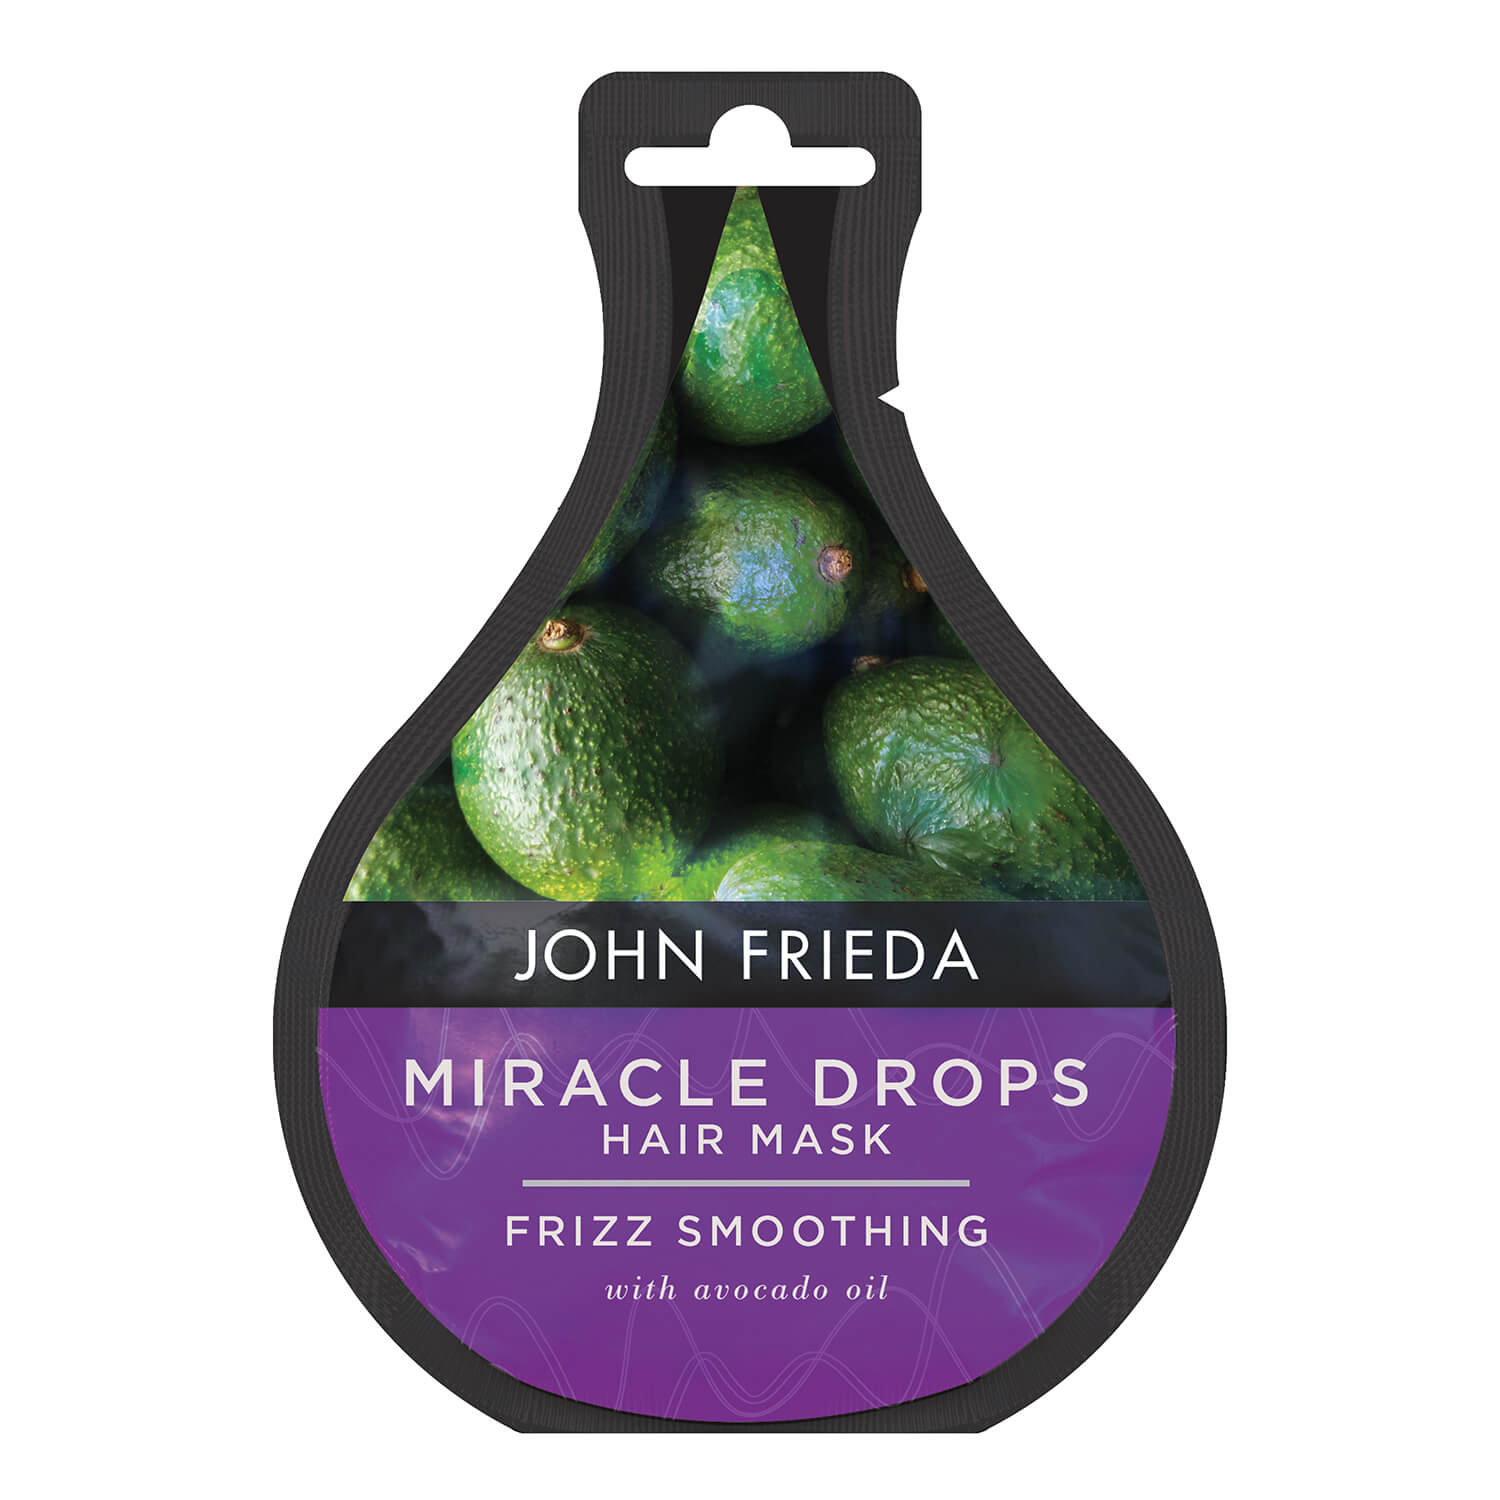 John Frieda Miracle Drops Frizz Smoothing 1 Shaws Department Stores